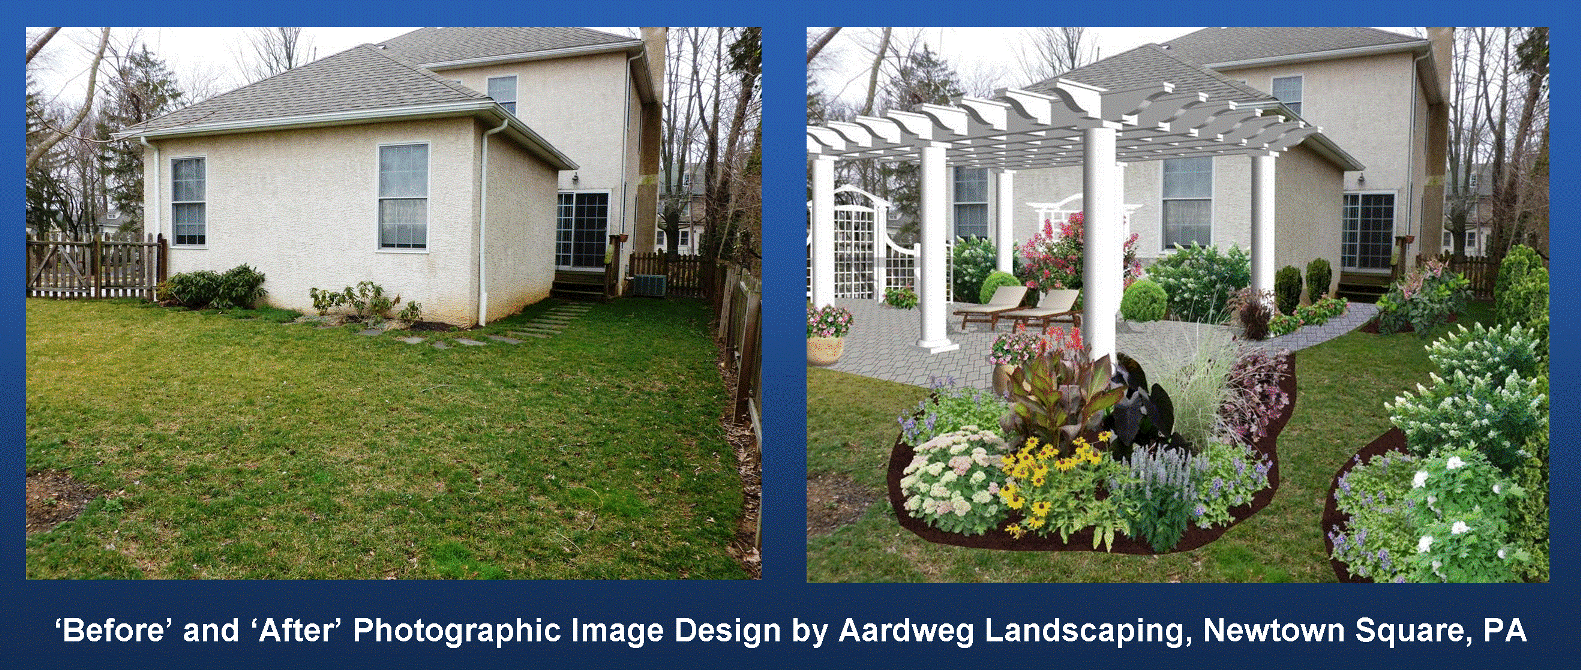 ‘Before’ and ‘After’ Photographic Image Design by Aardweg Landscaping, Newtown Square, PA 1 - Copy